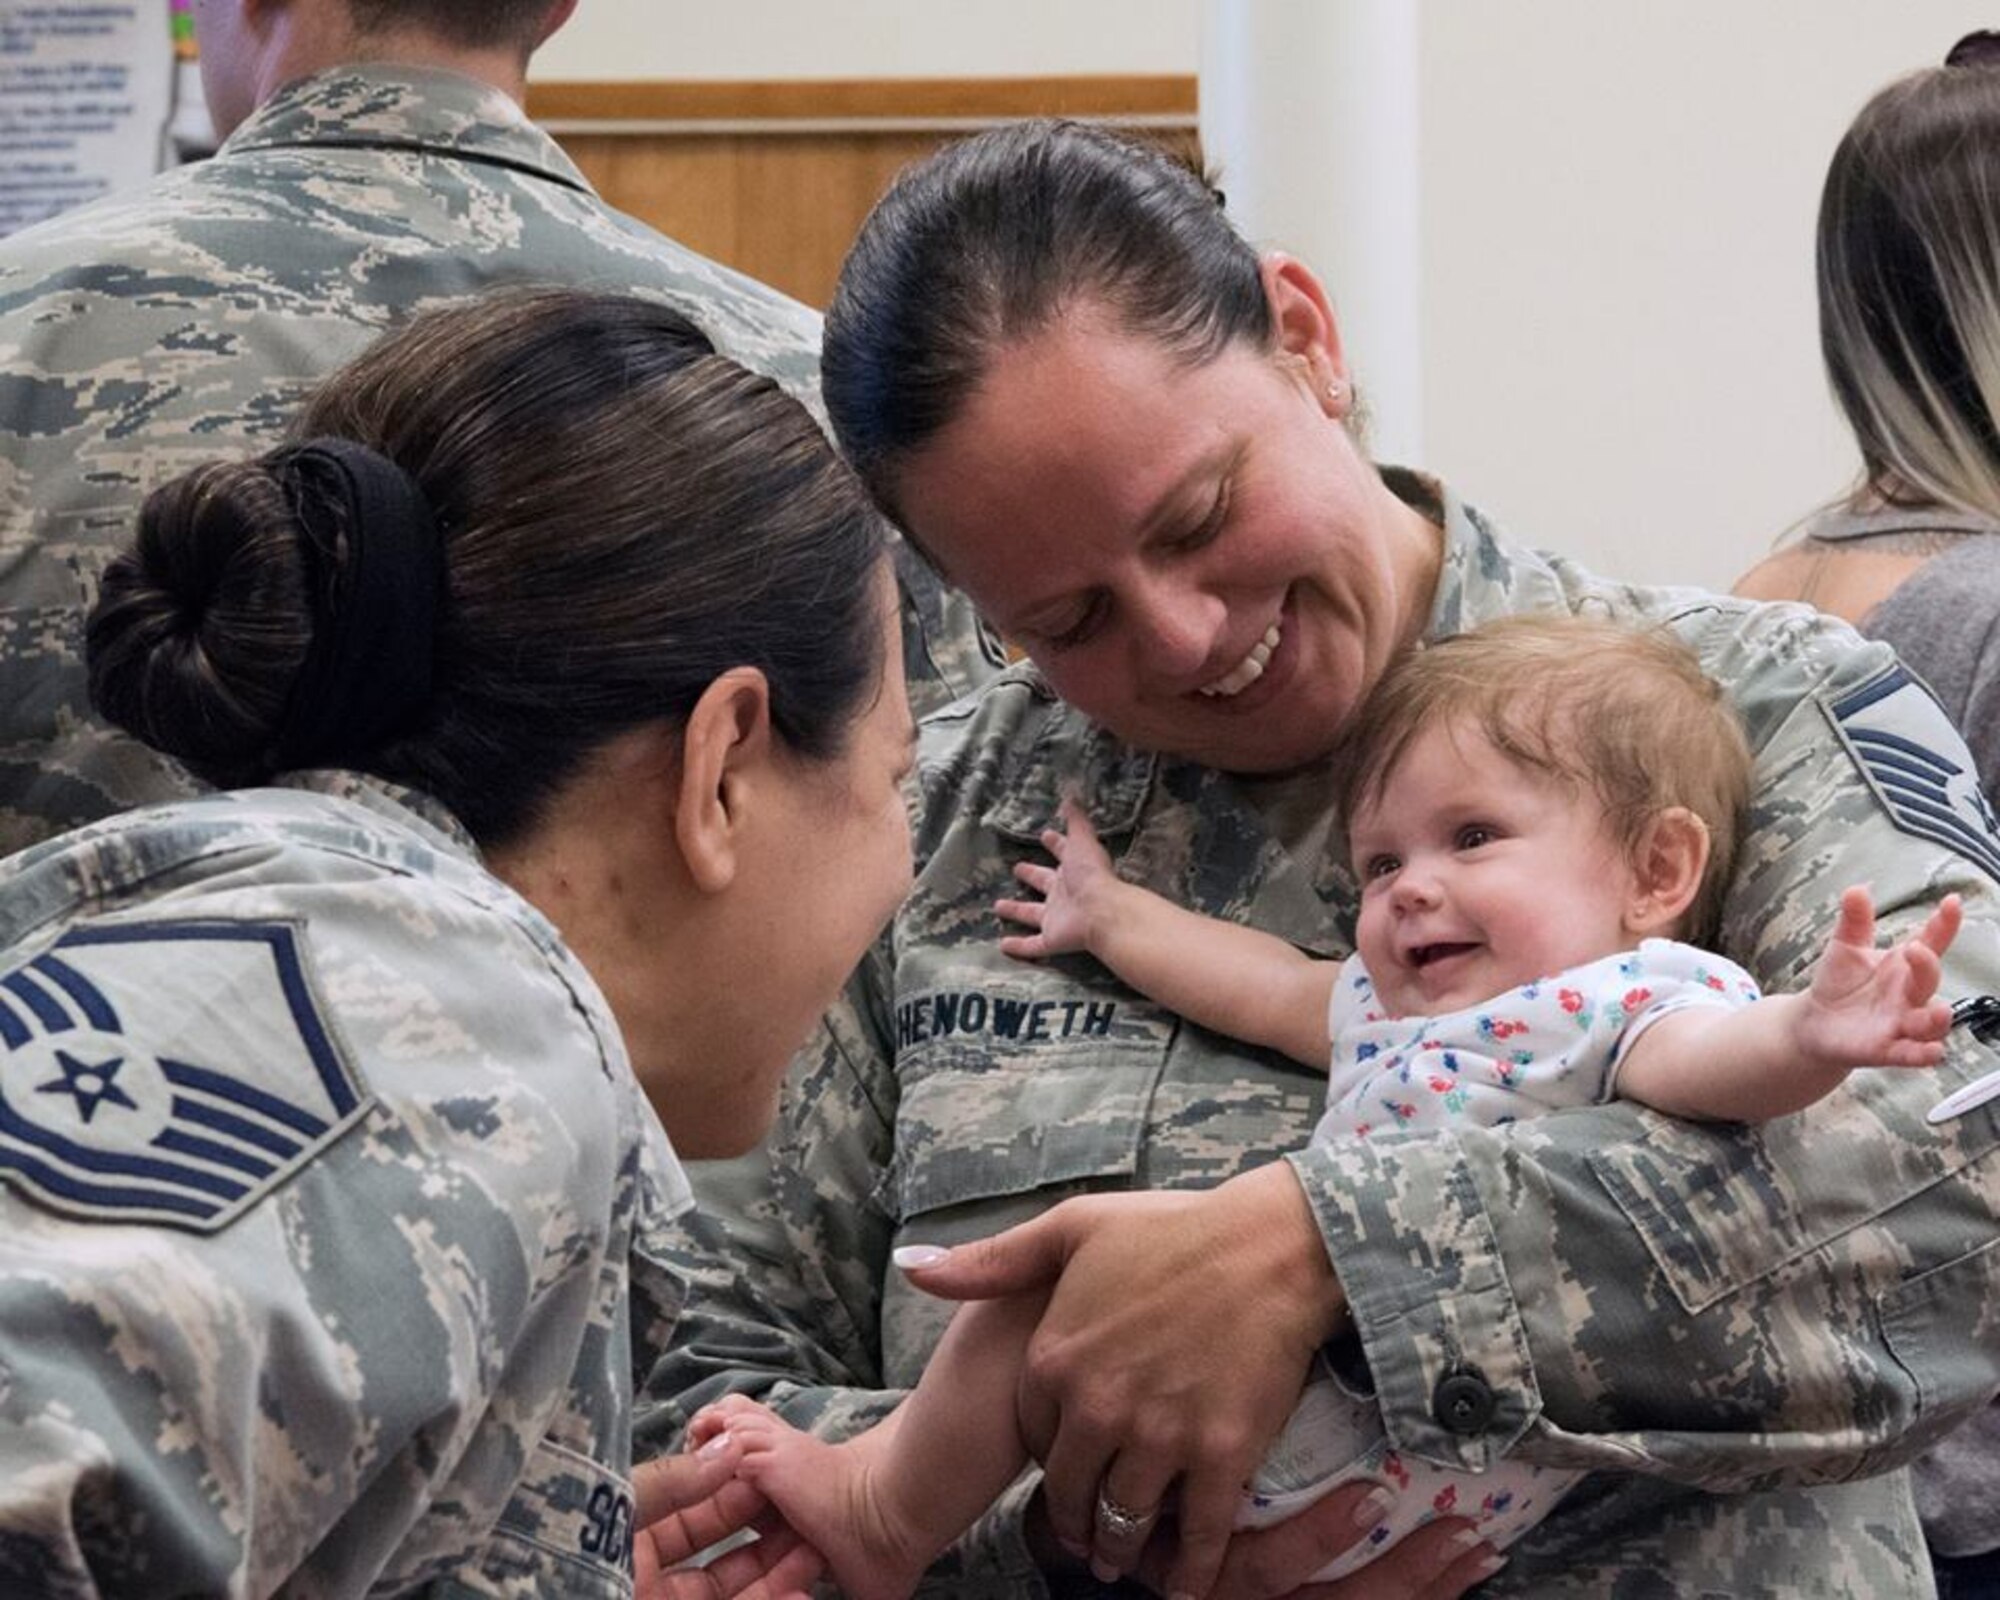 Master Sgt. Angela Chenoweth, Airman and Family Readiness NCO in charge, holds a child from a Tyndall Air Force Base, Fla. family during an Emergency Family Assistance Center at Patrick Air Force Base, Fla. on Oct. 17, 2018. The EFAC provided a forum to connect Tyndall AFB families displaced by Hurricane Michael with Patrick AFB agencies.